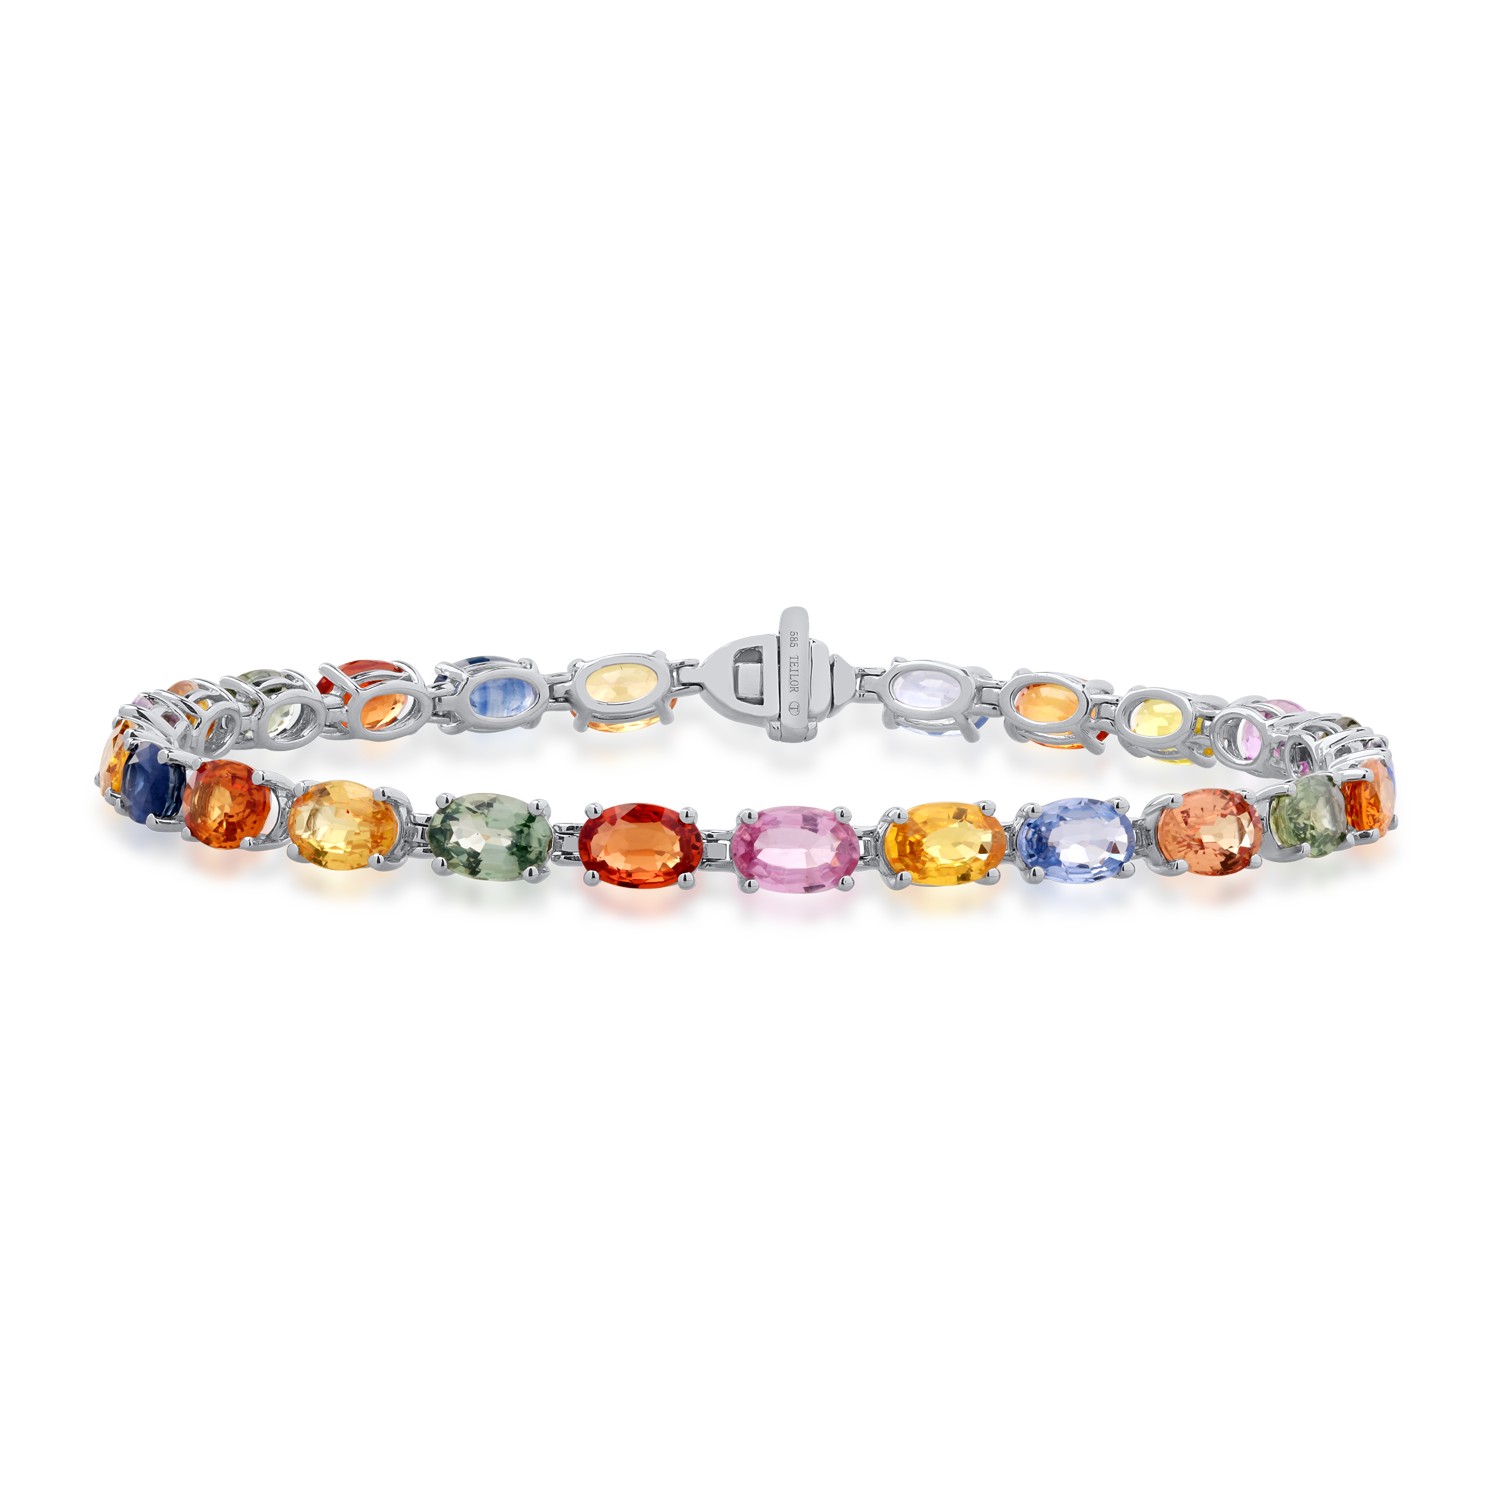 14K white gold tennis bracelet with 13.14ct multicolored sapphires